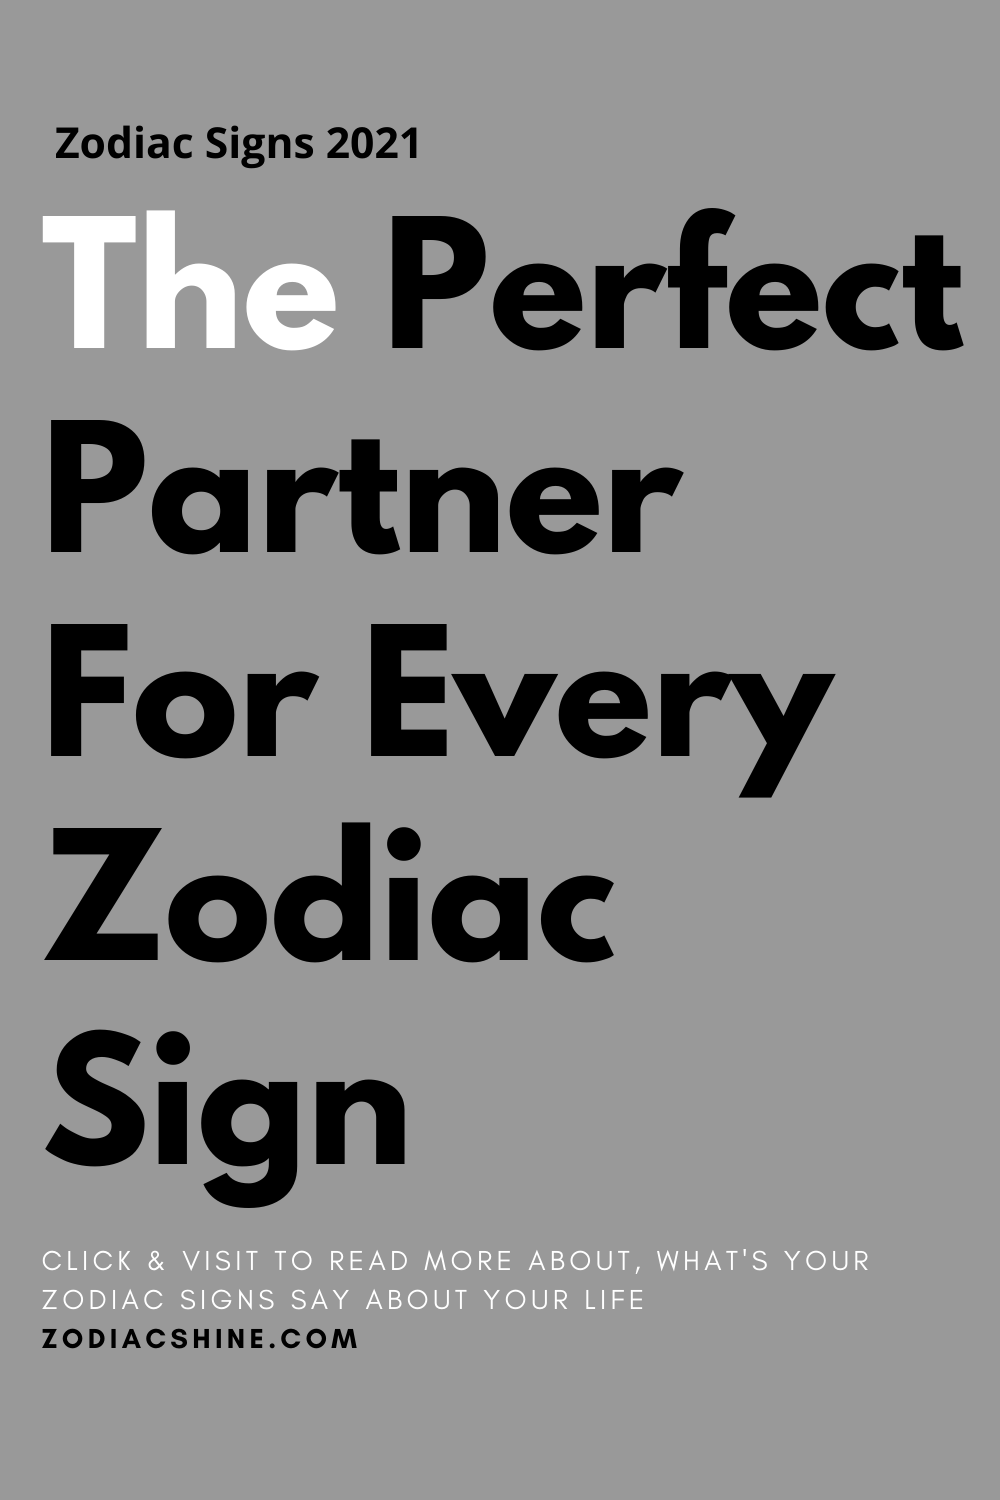 The Perfect Partner For Every Zodiac Sign